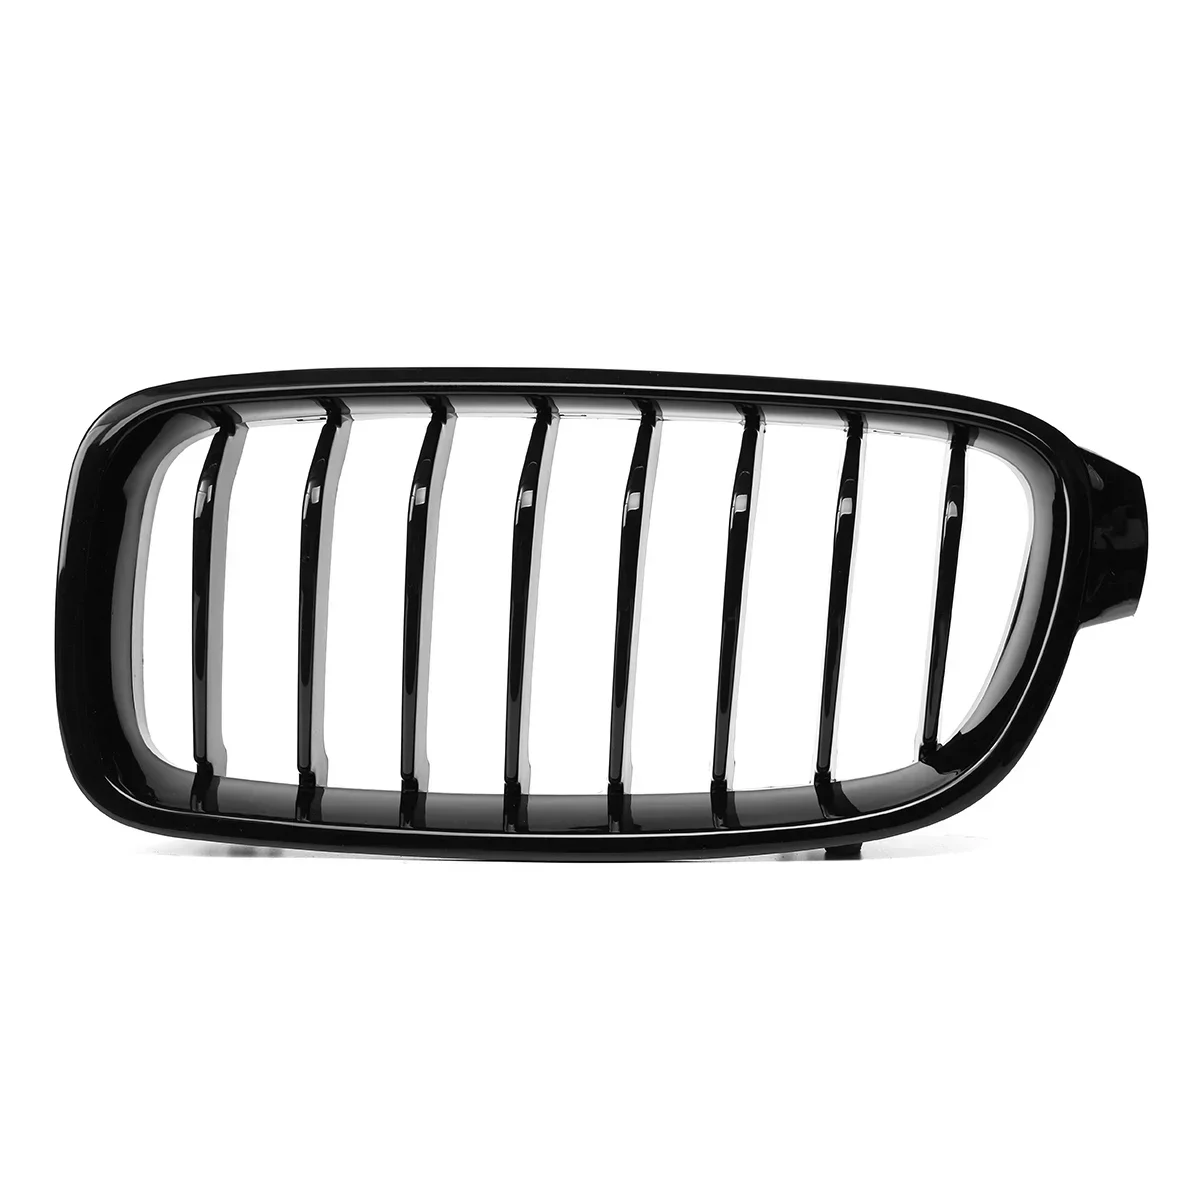 Pair Glossy Black Car Front Kidney Single Slat Grille Grill M Style For BMW 3 Series F30 F31 F35 F80 2012-2018 Racing Grilles